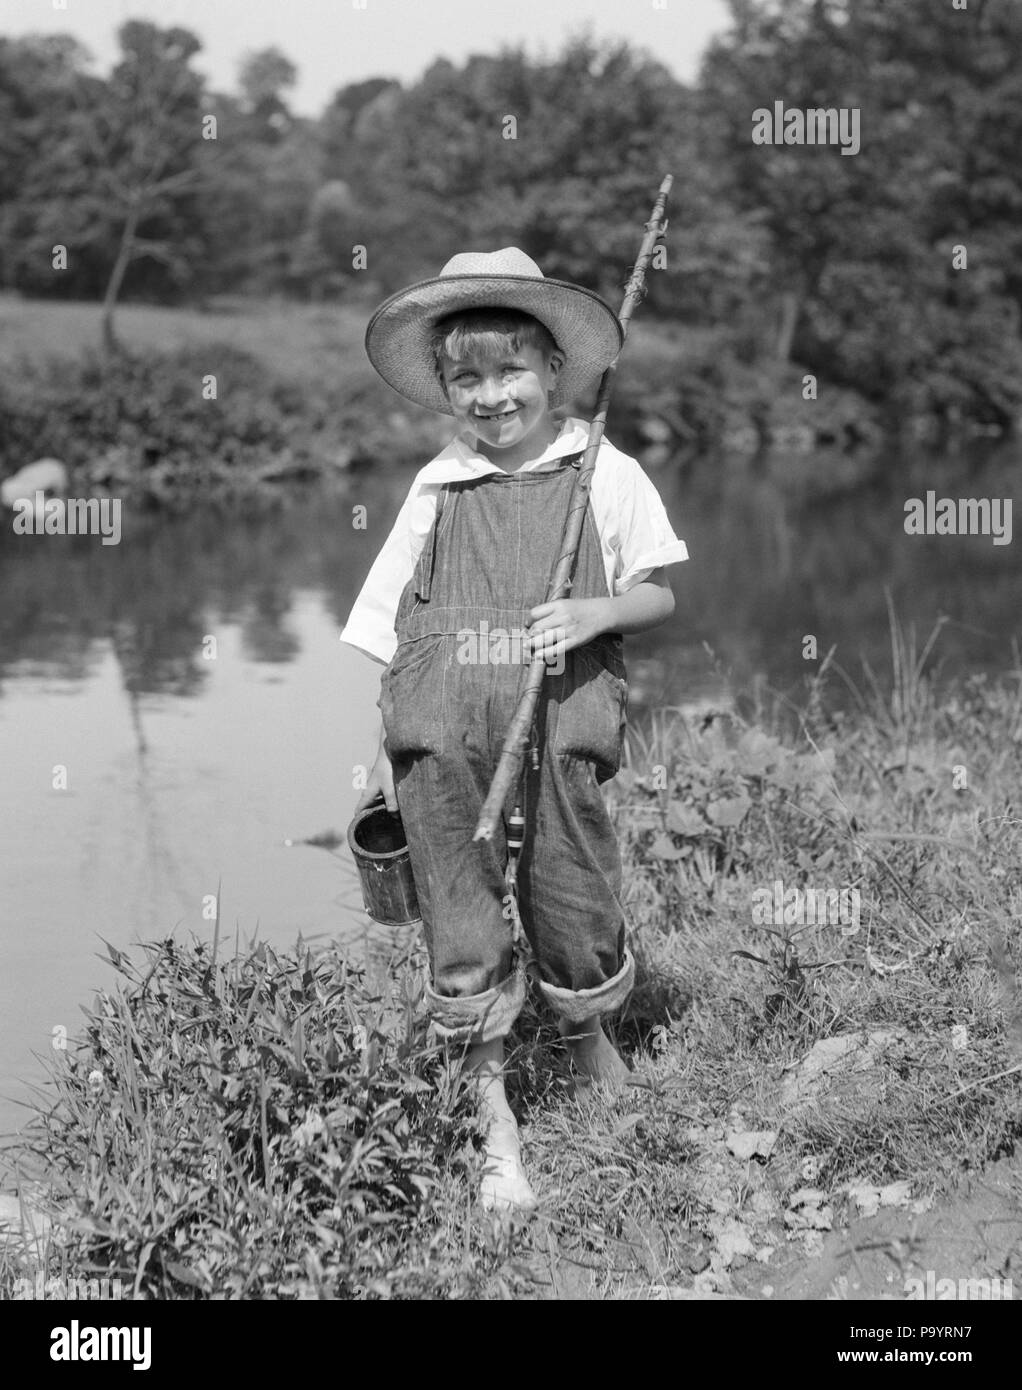 1920s 1930s BAREFOOT BOY CARRYING STICK FISHING ROD CAN OF BAIT